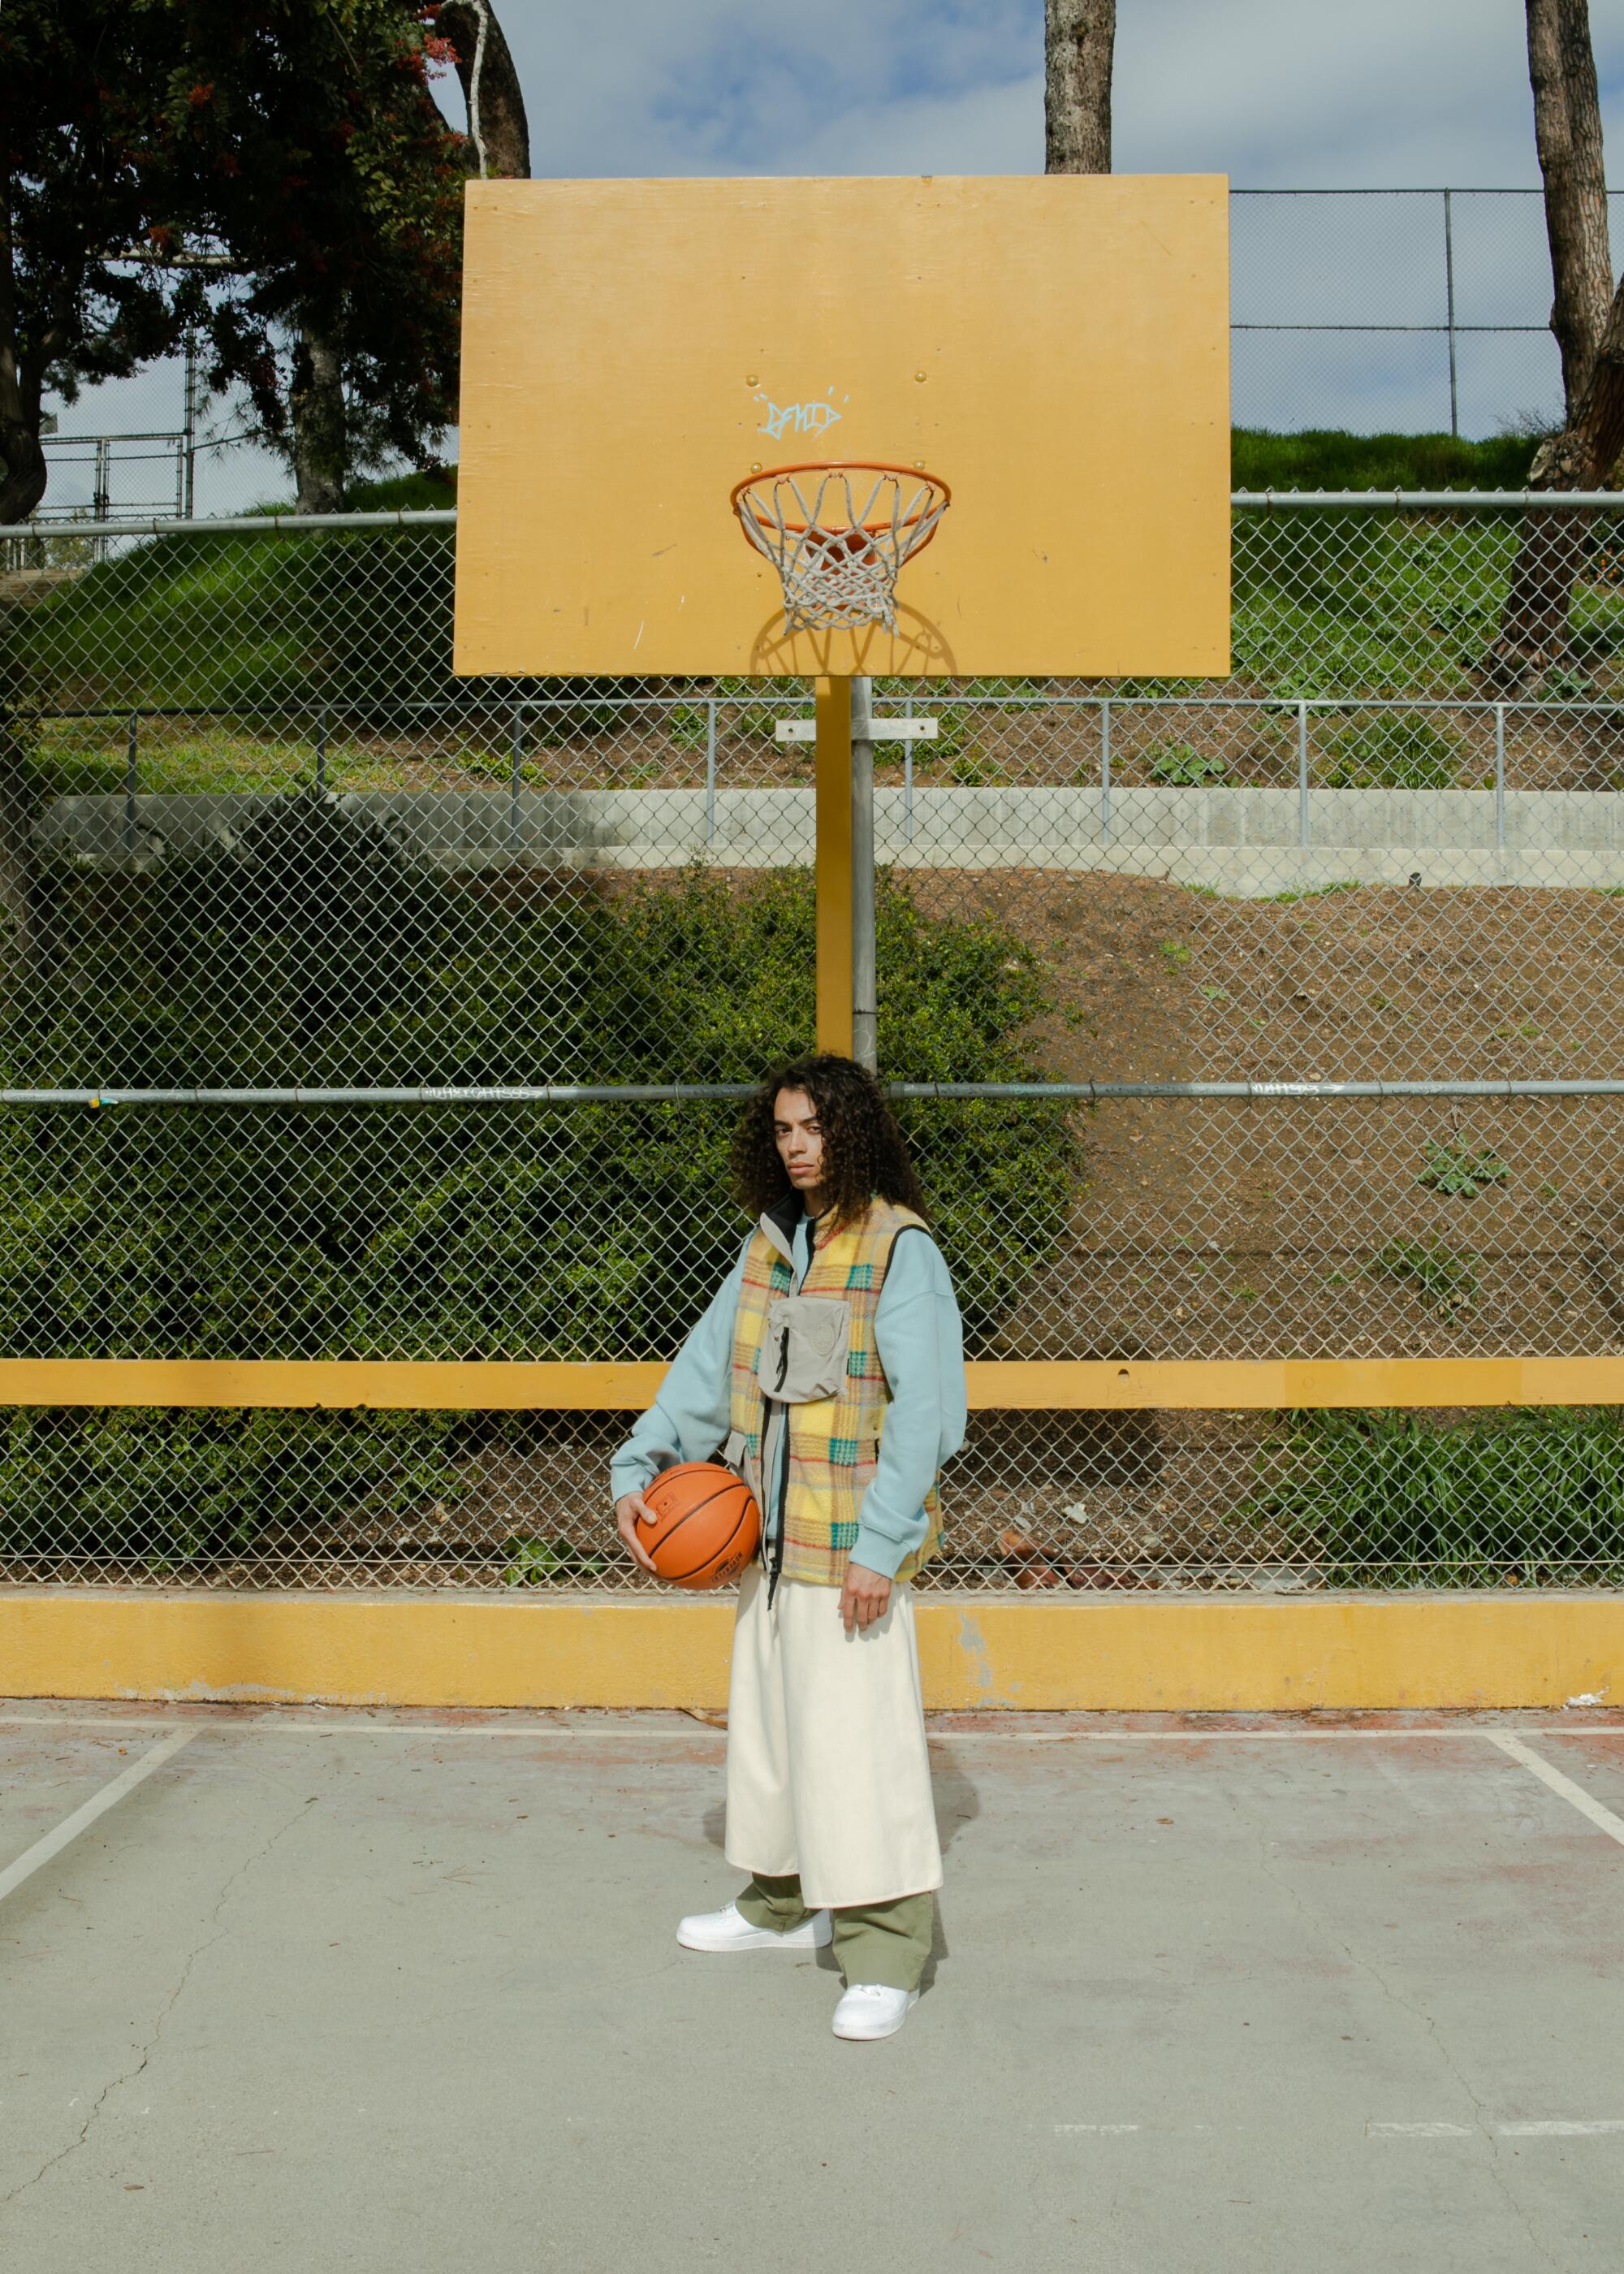 A model holding a basketball wears a plaid vest and loose-fitting outerwear.